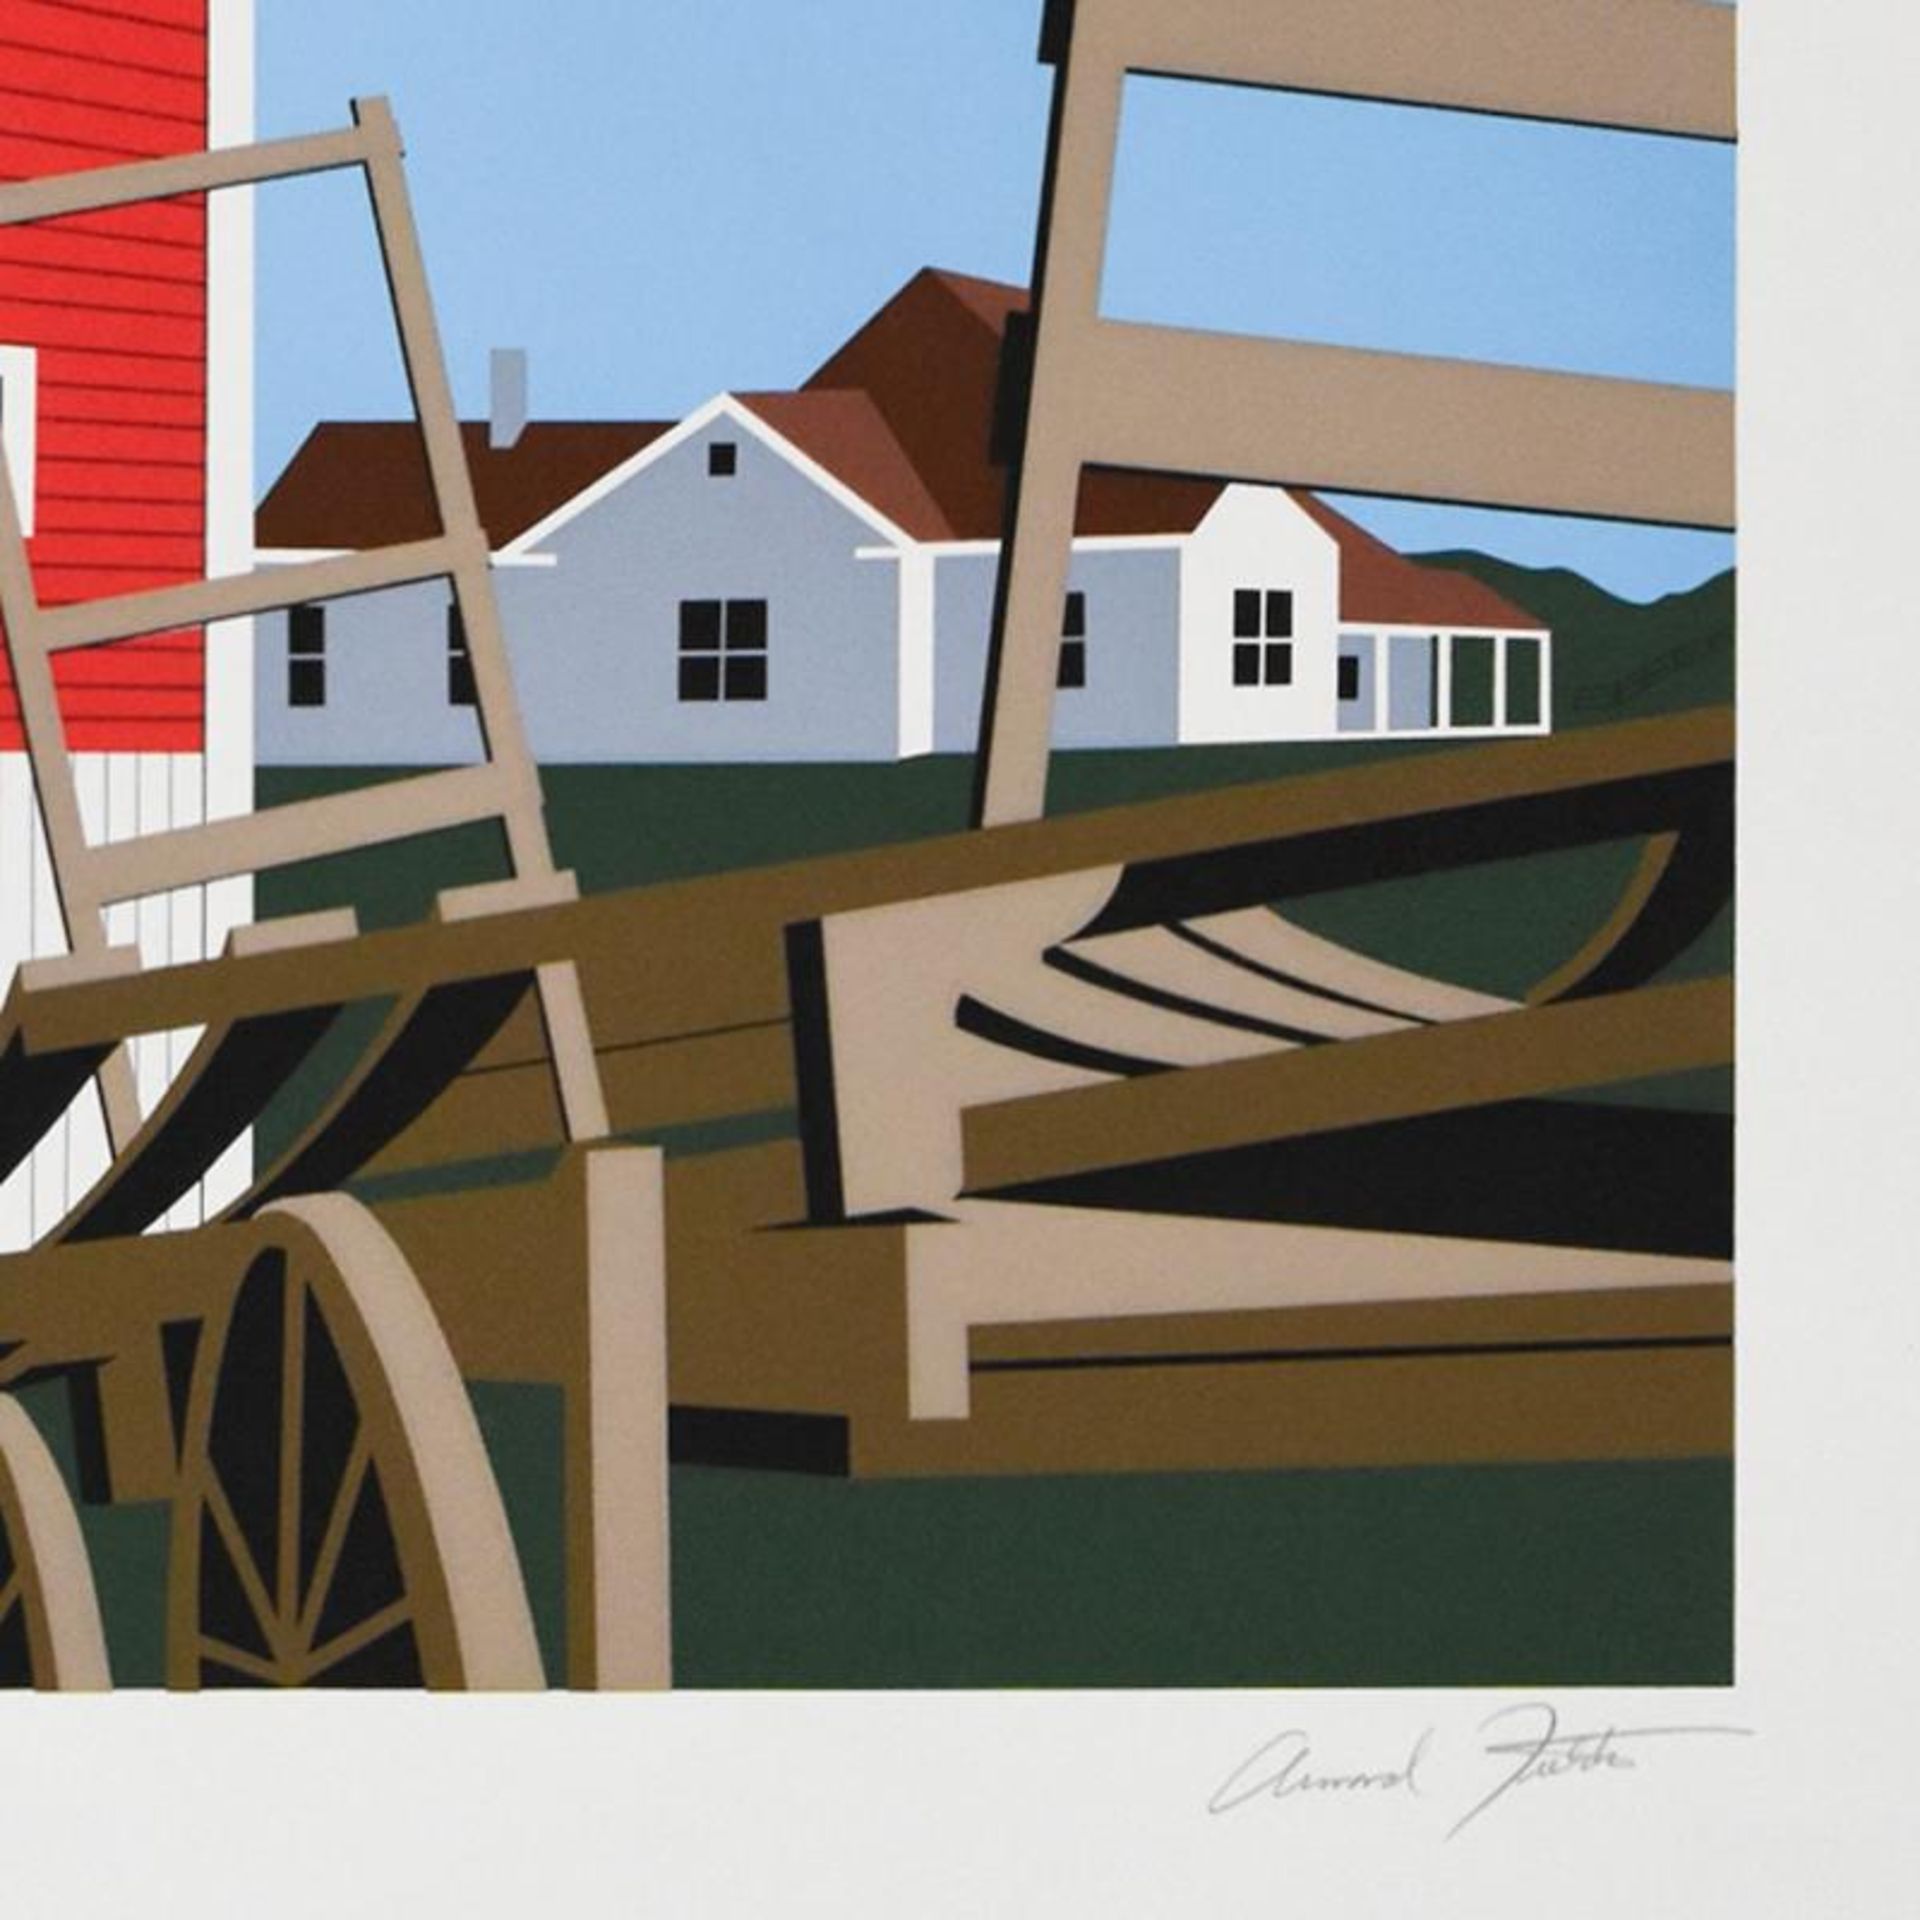 Armond Fields (1930-2008), "Red Barn" Limited Edition Hand Pulled Original Serig - Image 2 of 2